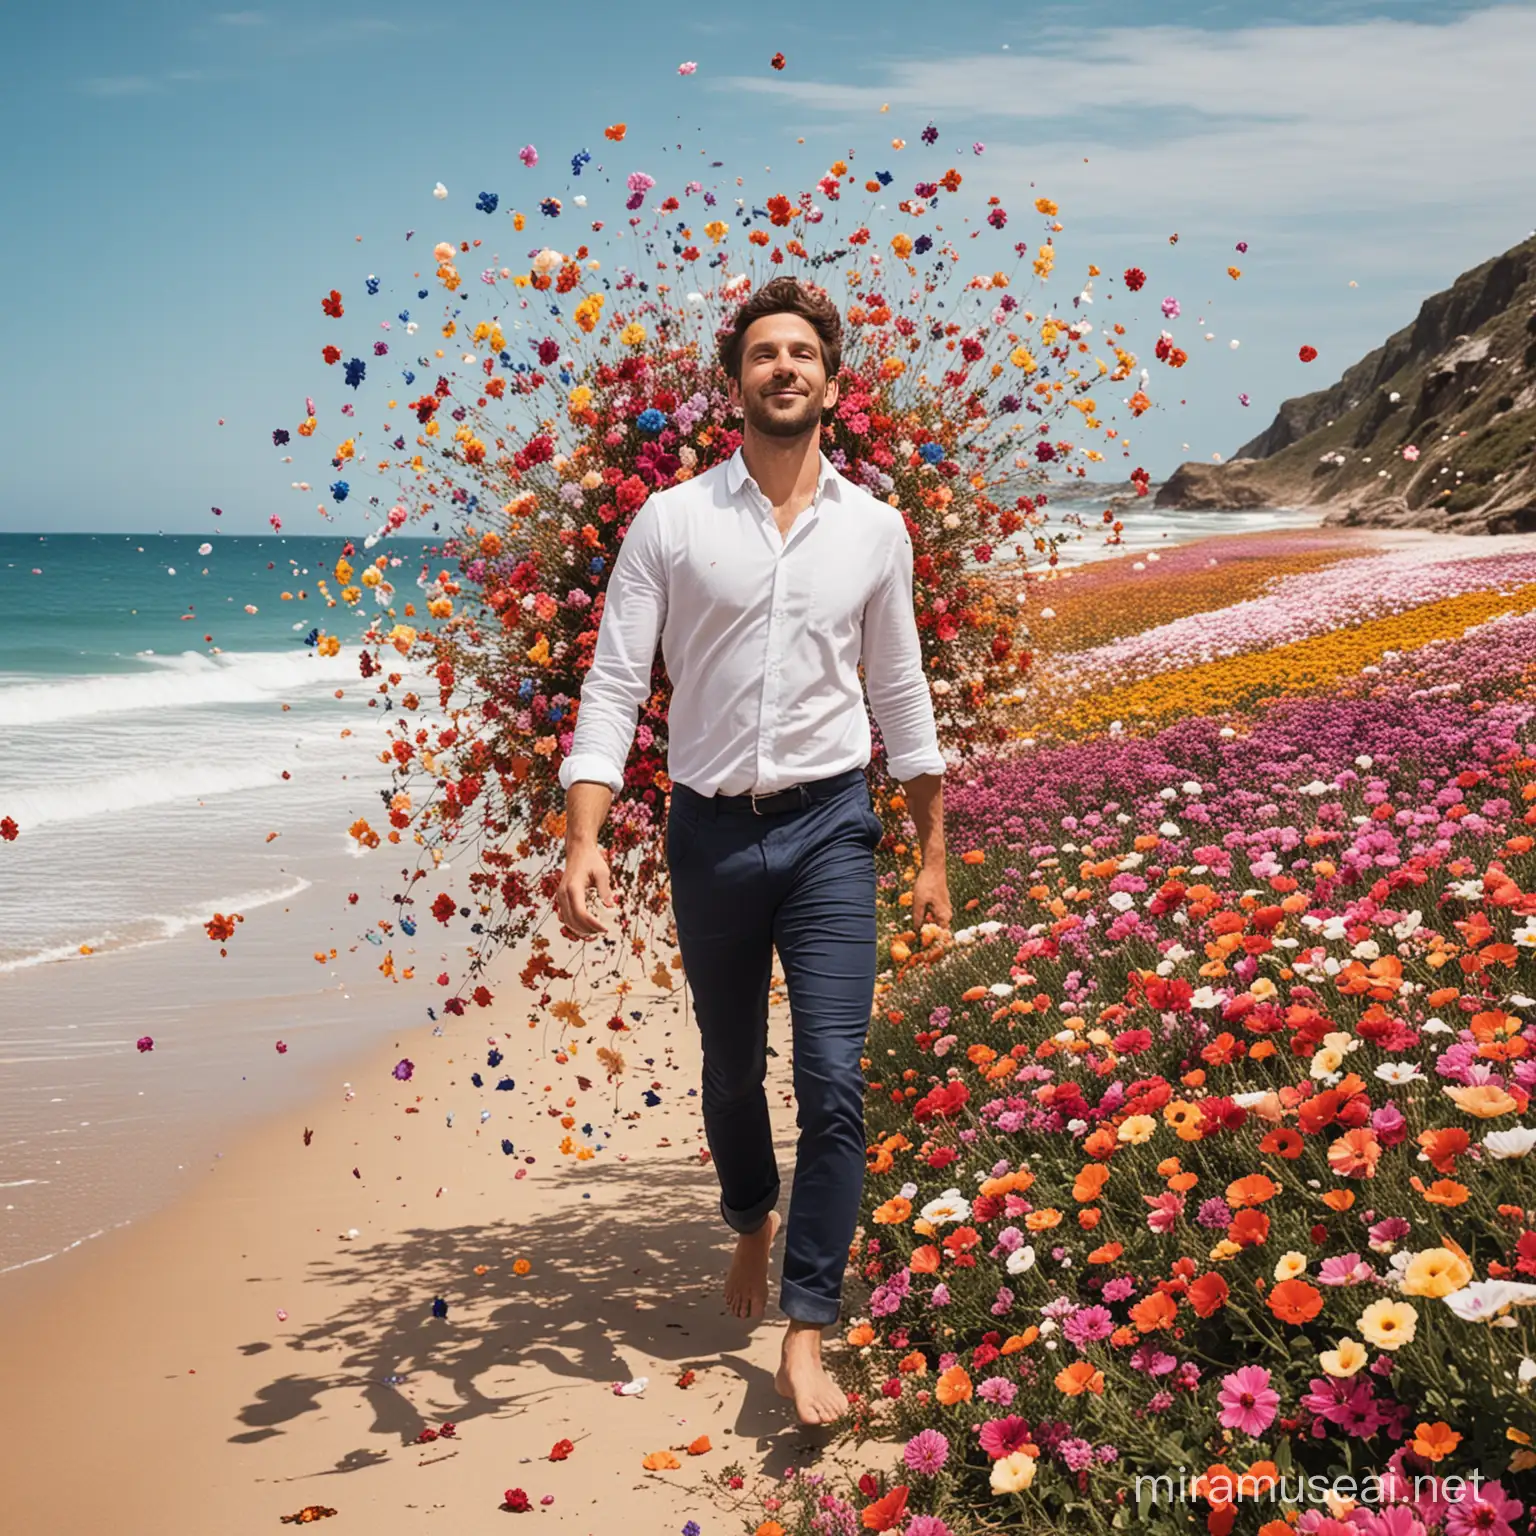 a man on a beach with a lot of colourfull flowers that fly around him
